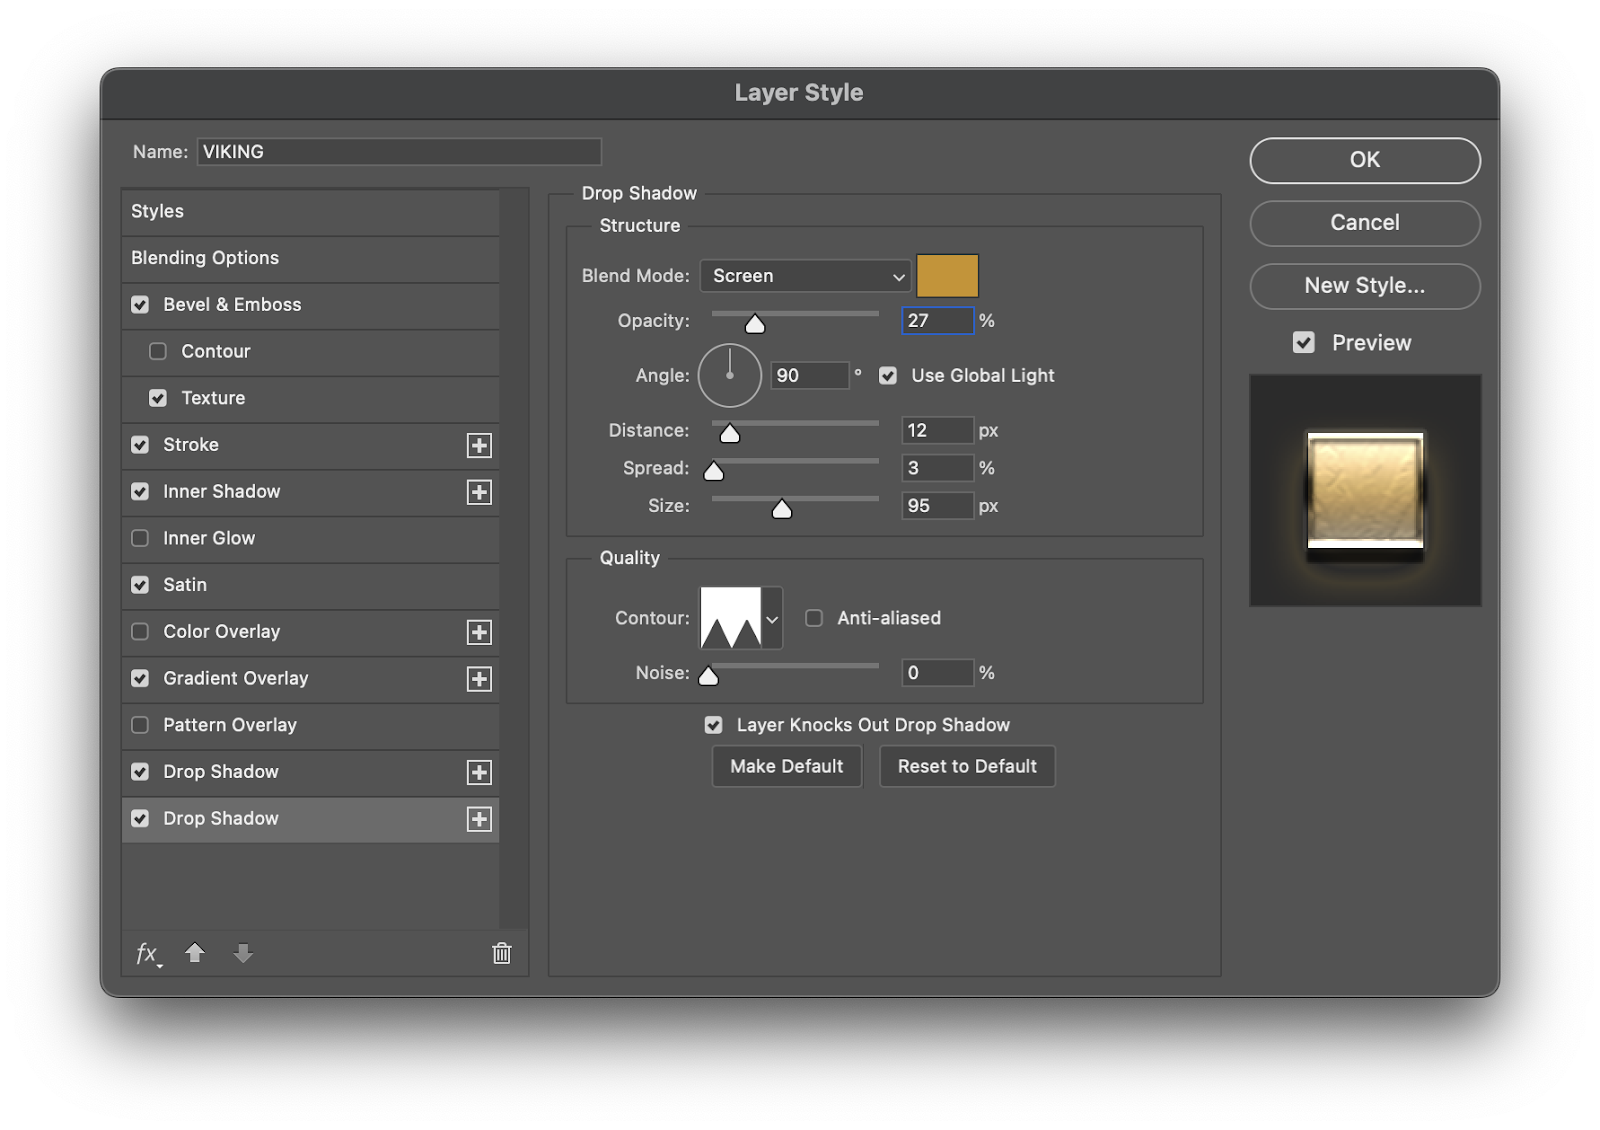 Image from the Photoshop Tutorial on how to create a simple and scalable gold effect with layer styles